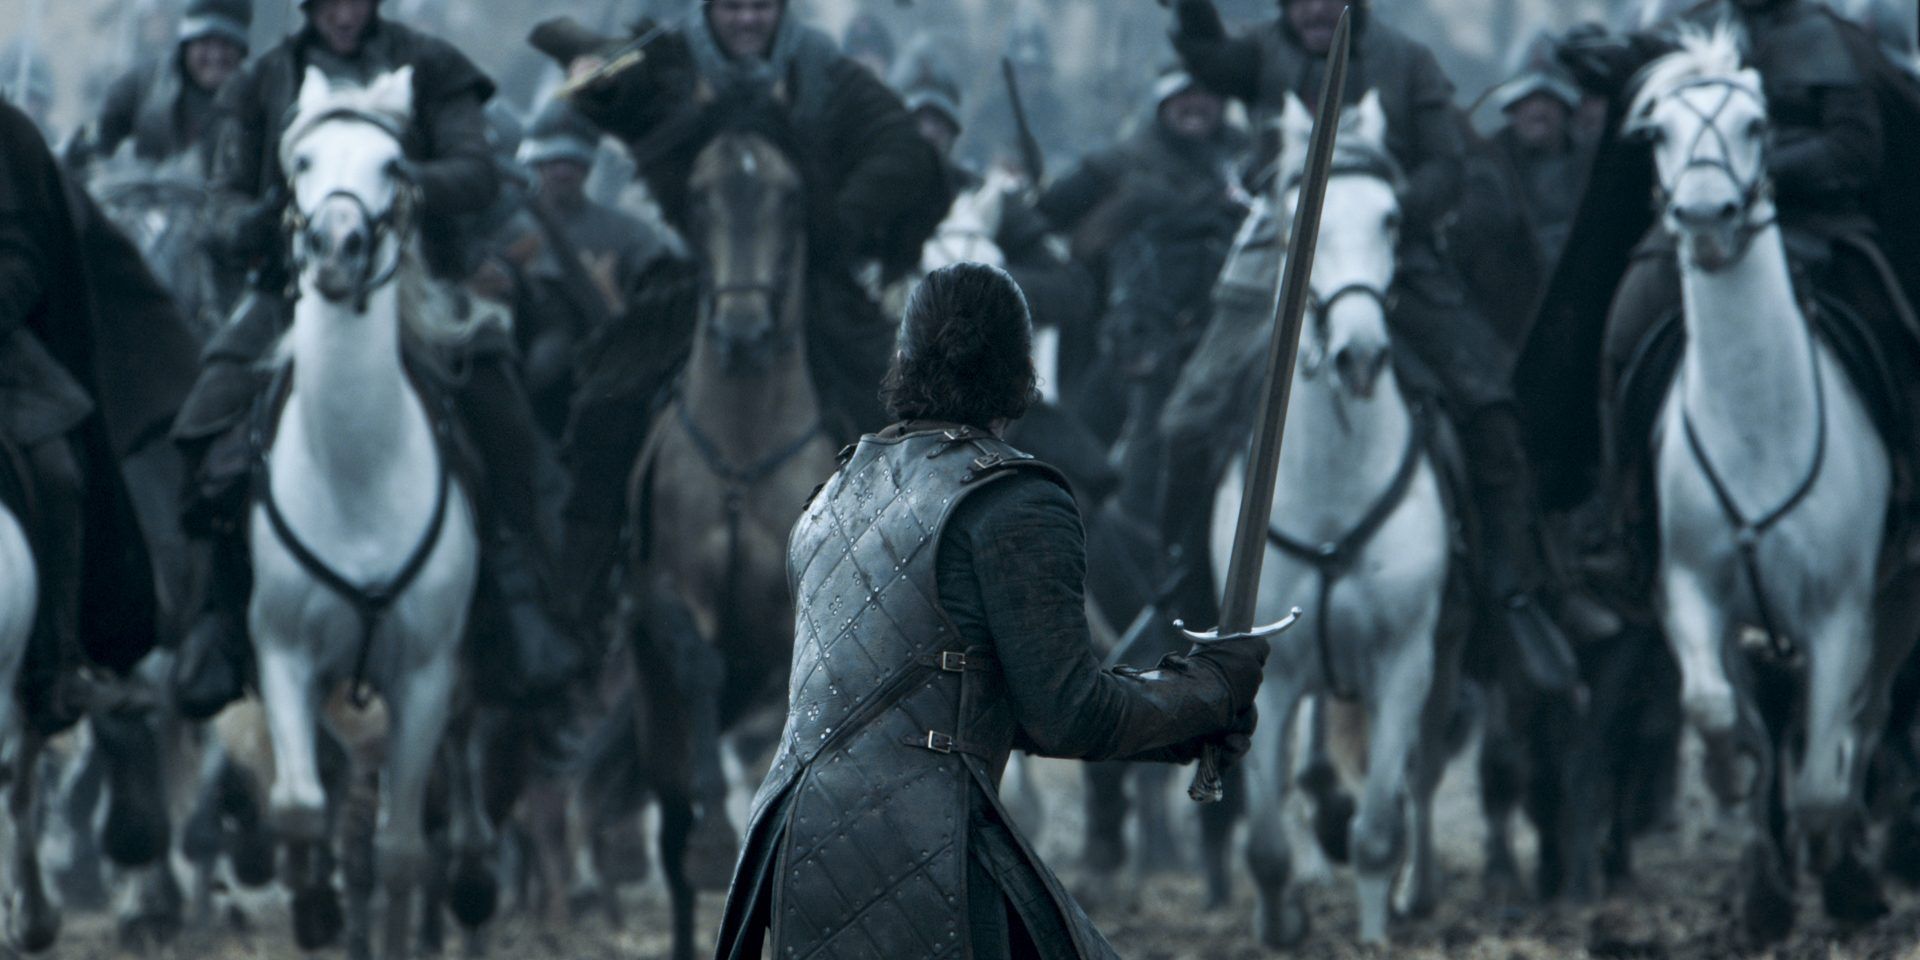 Kit Harington as Jon Snow facing a stampede in the Battle of the Bastards in Game of Thrones